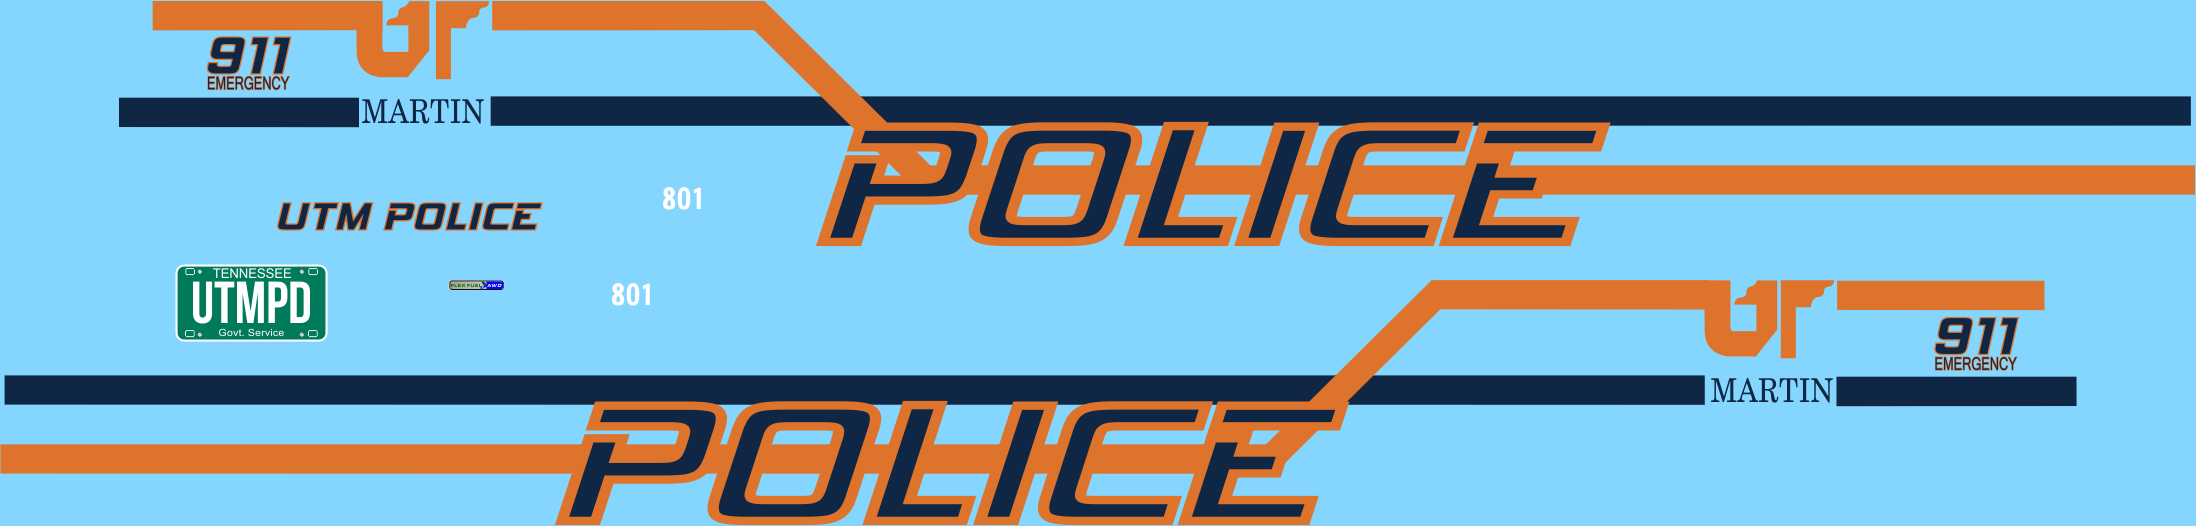 1/43 University of Tennessee Martin Police Department waterslide decals